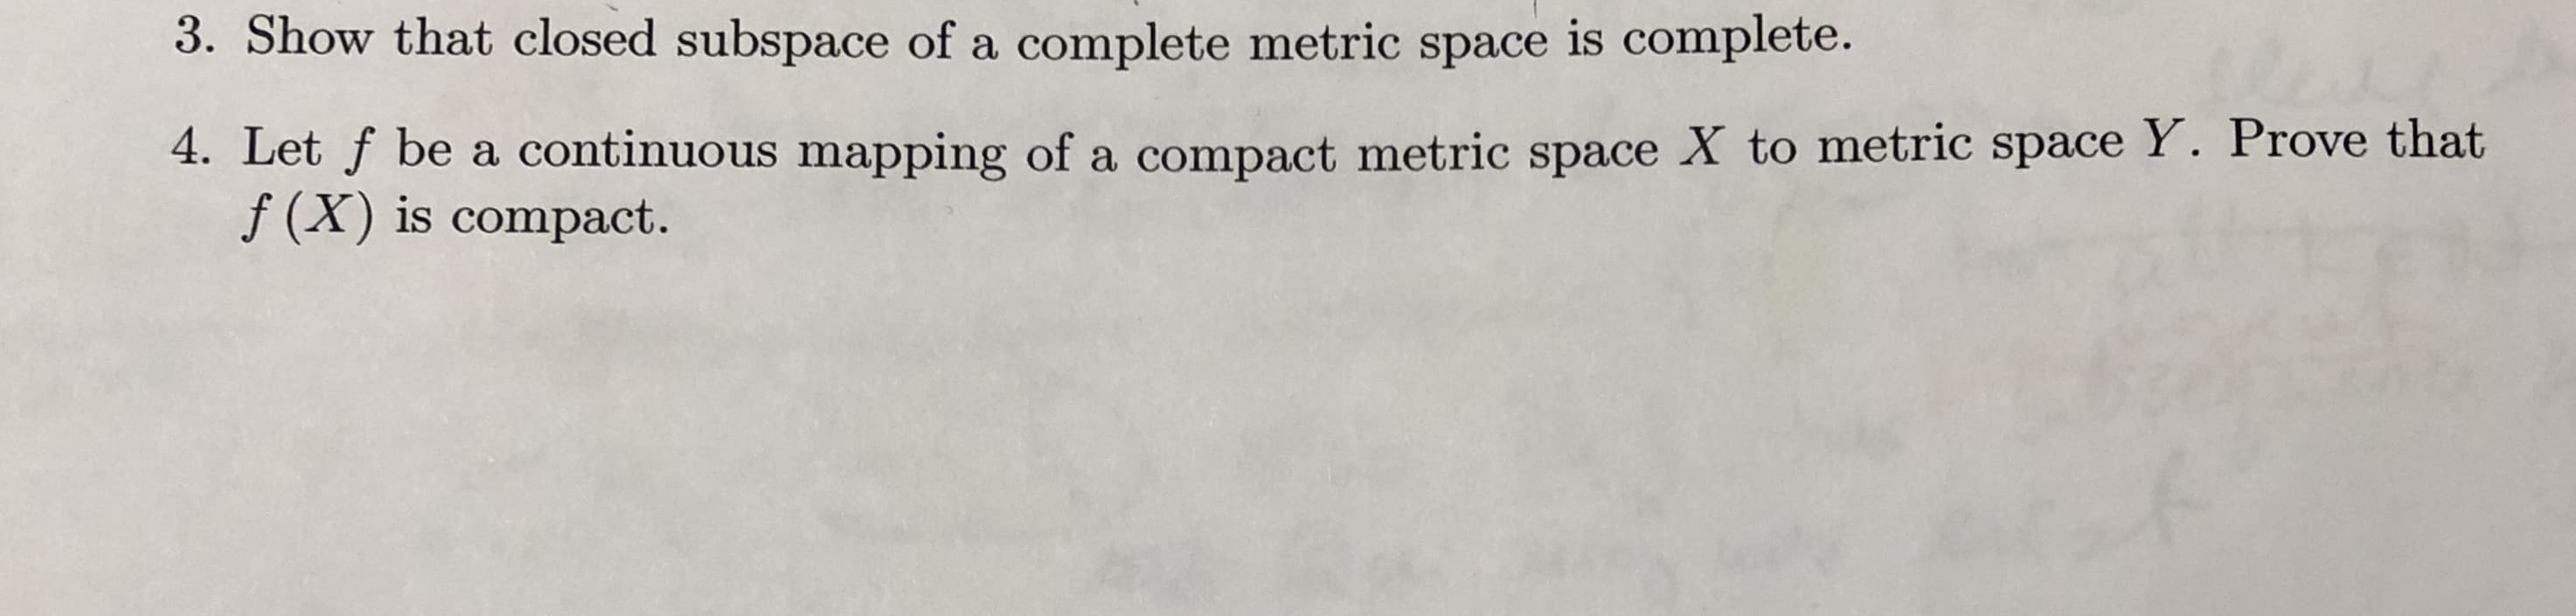 3. Show that closed subspace of a complete metric space is complete.
4. Let f be a continuous mapping of a compact metric space X to metric space Y. Prove that
f (X) is compact.
A 1S
